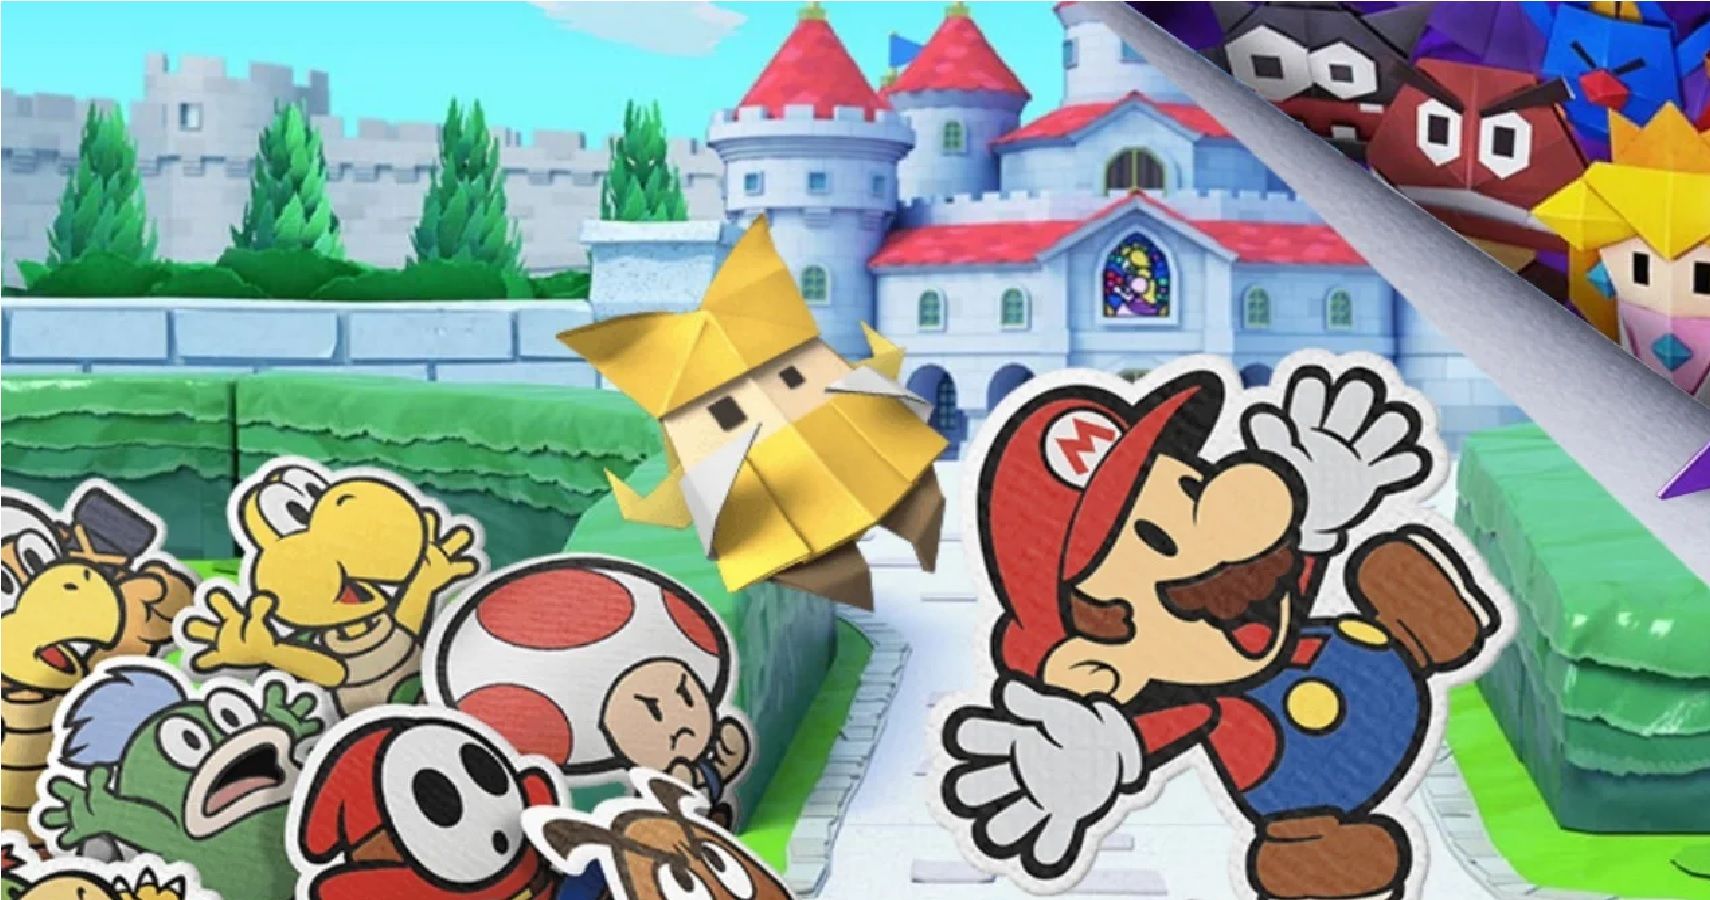 Paper Mario The Origami King Physical Sales Aren’t Holding Up To Previous Entries In Japan